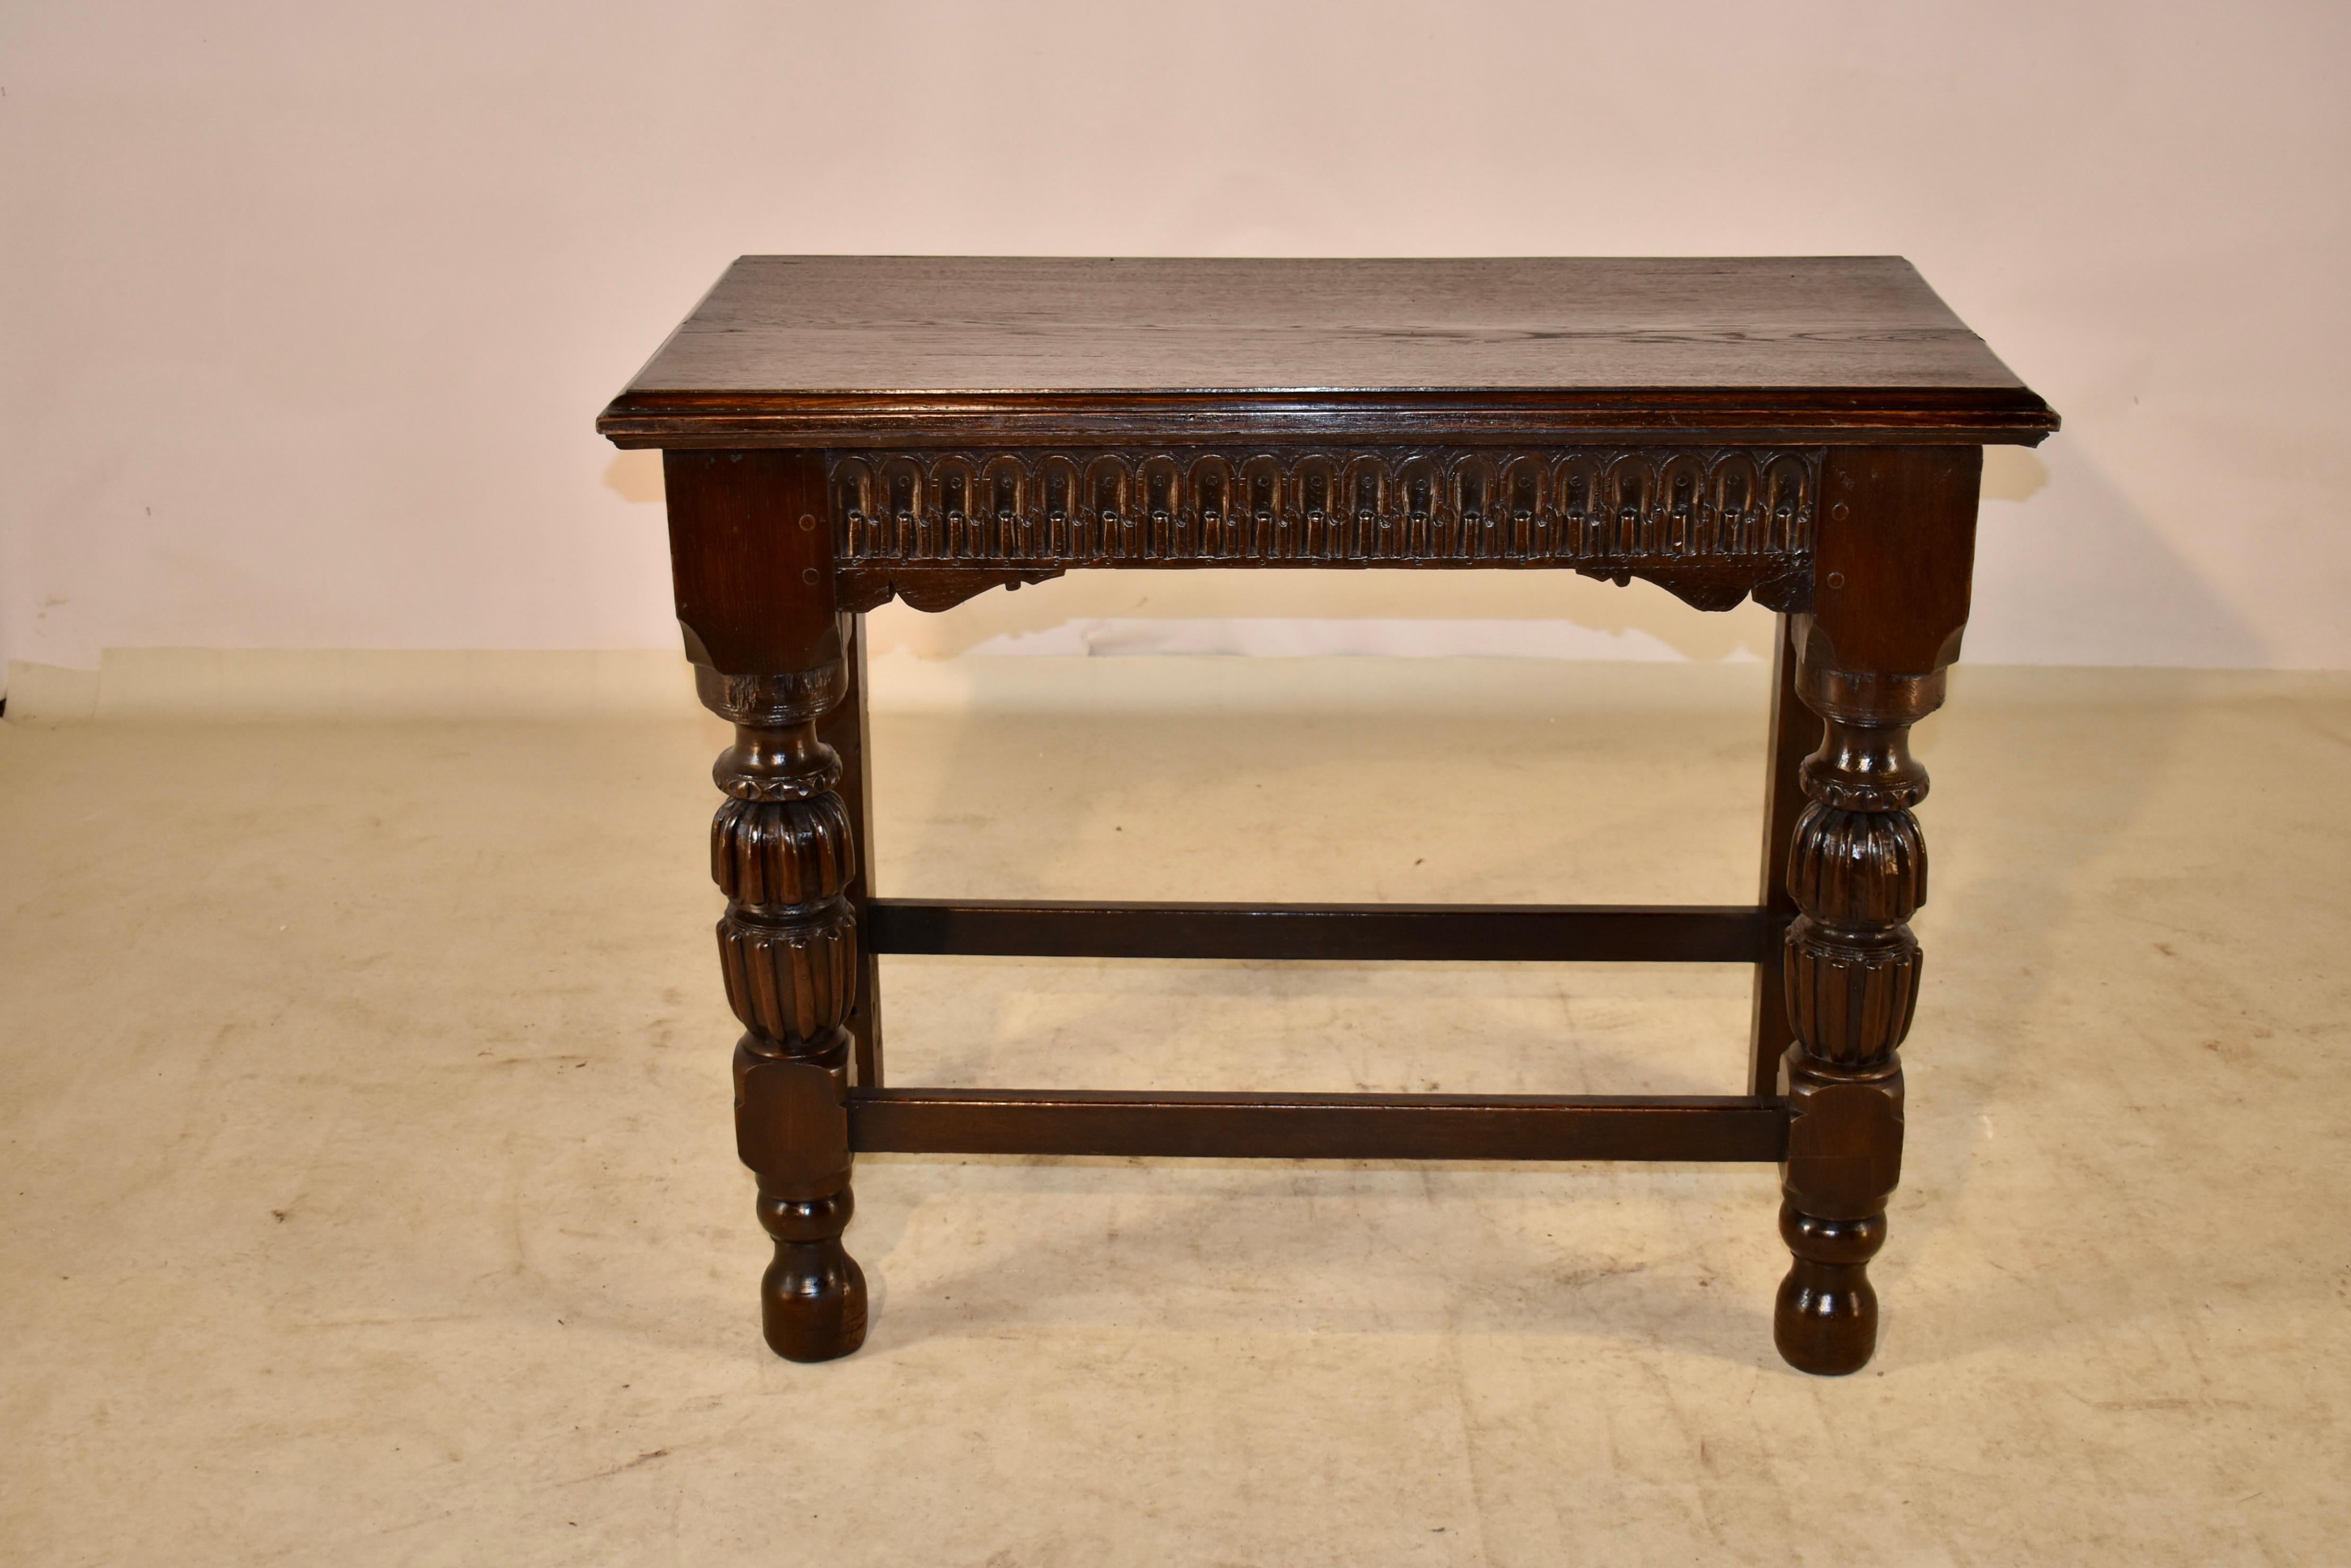 18th century oak console table from England. The top has a beveled edge, following down to a hand carved apron with nulling decoration over hand scalloped lower edges. The table is constructed with hand pegged detail, and is supported on hand turned